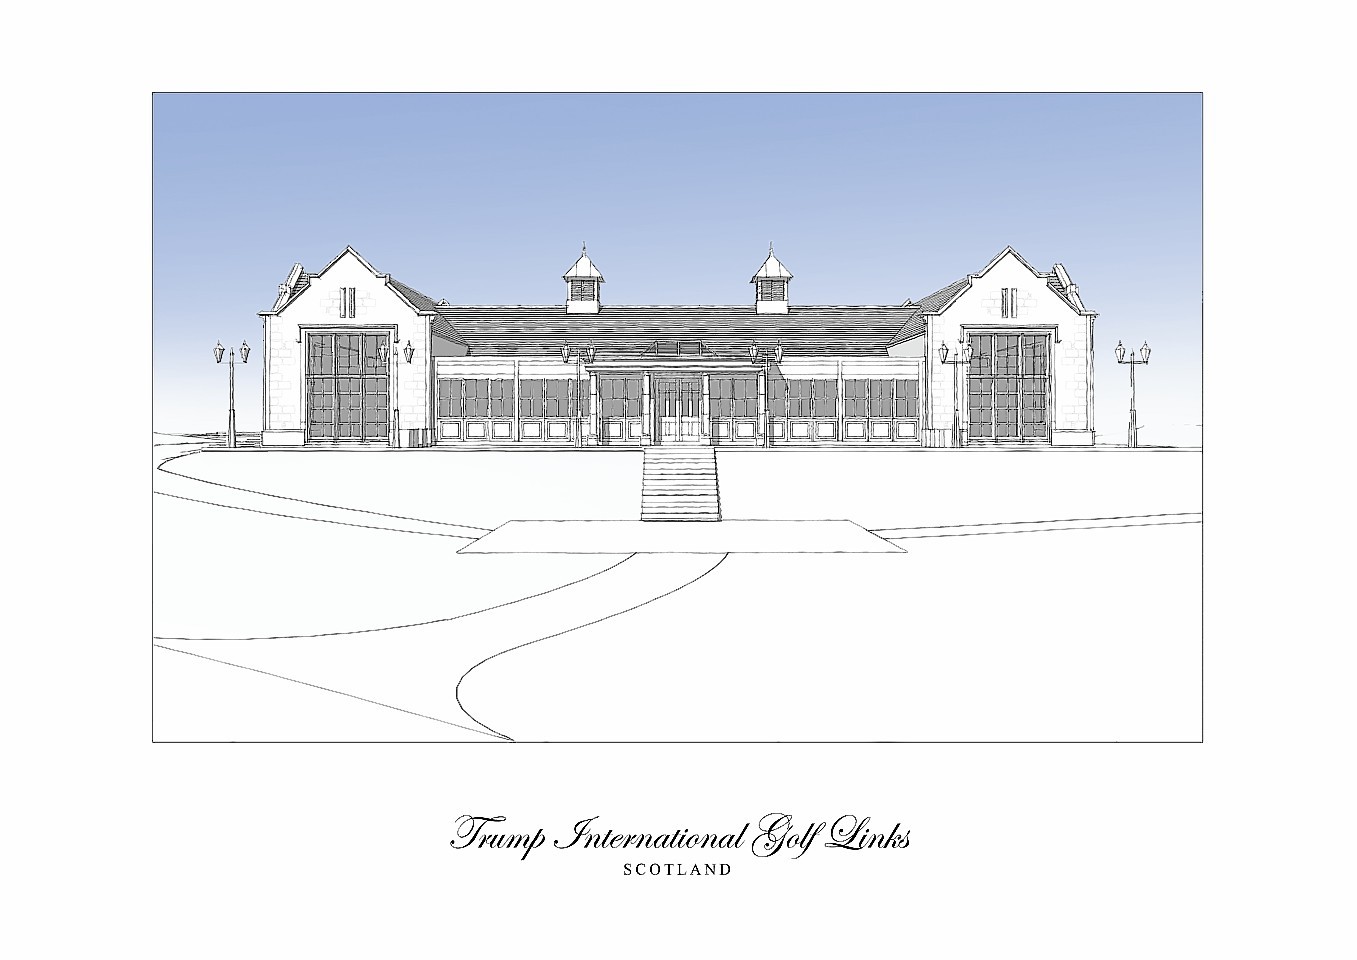 A first look at Donald Trump's planned new clubhouse for his Aberdeenshire golf resort